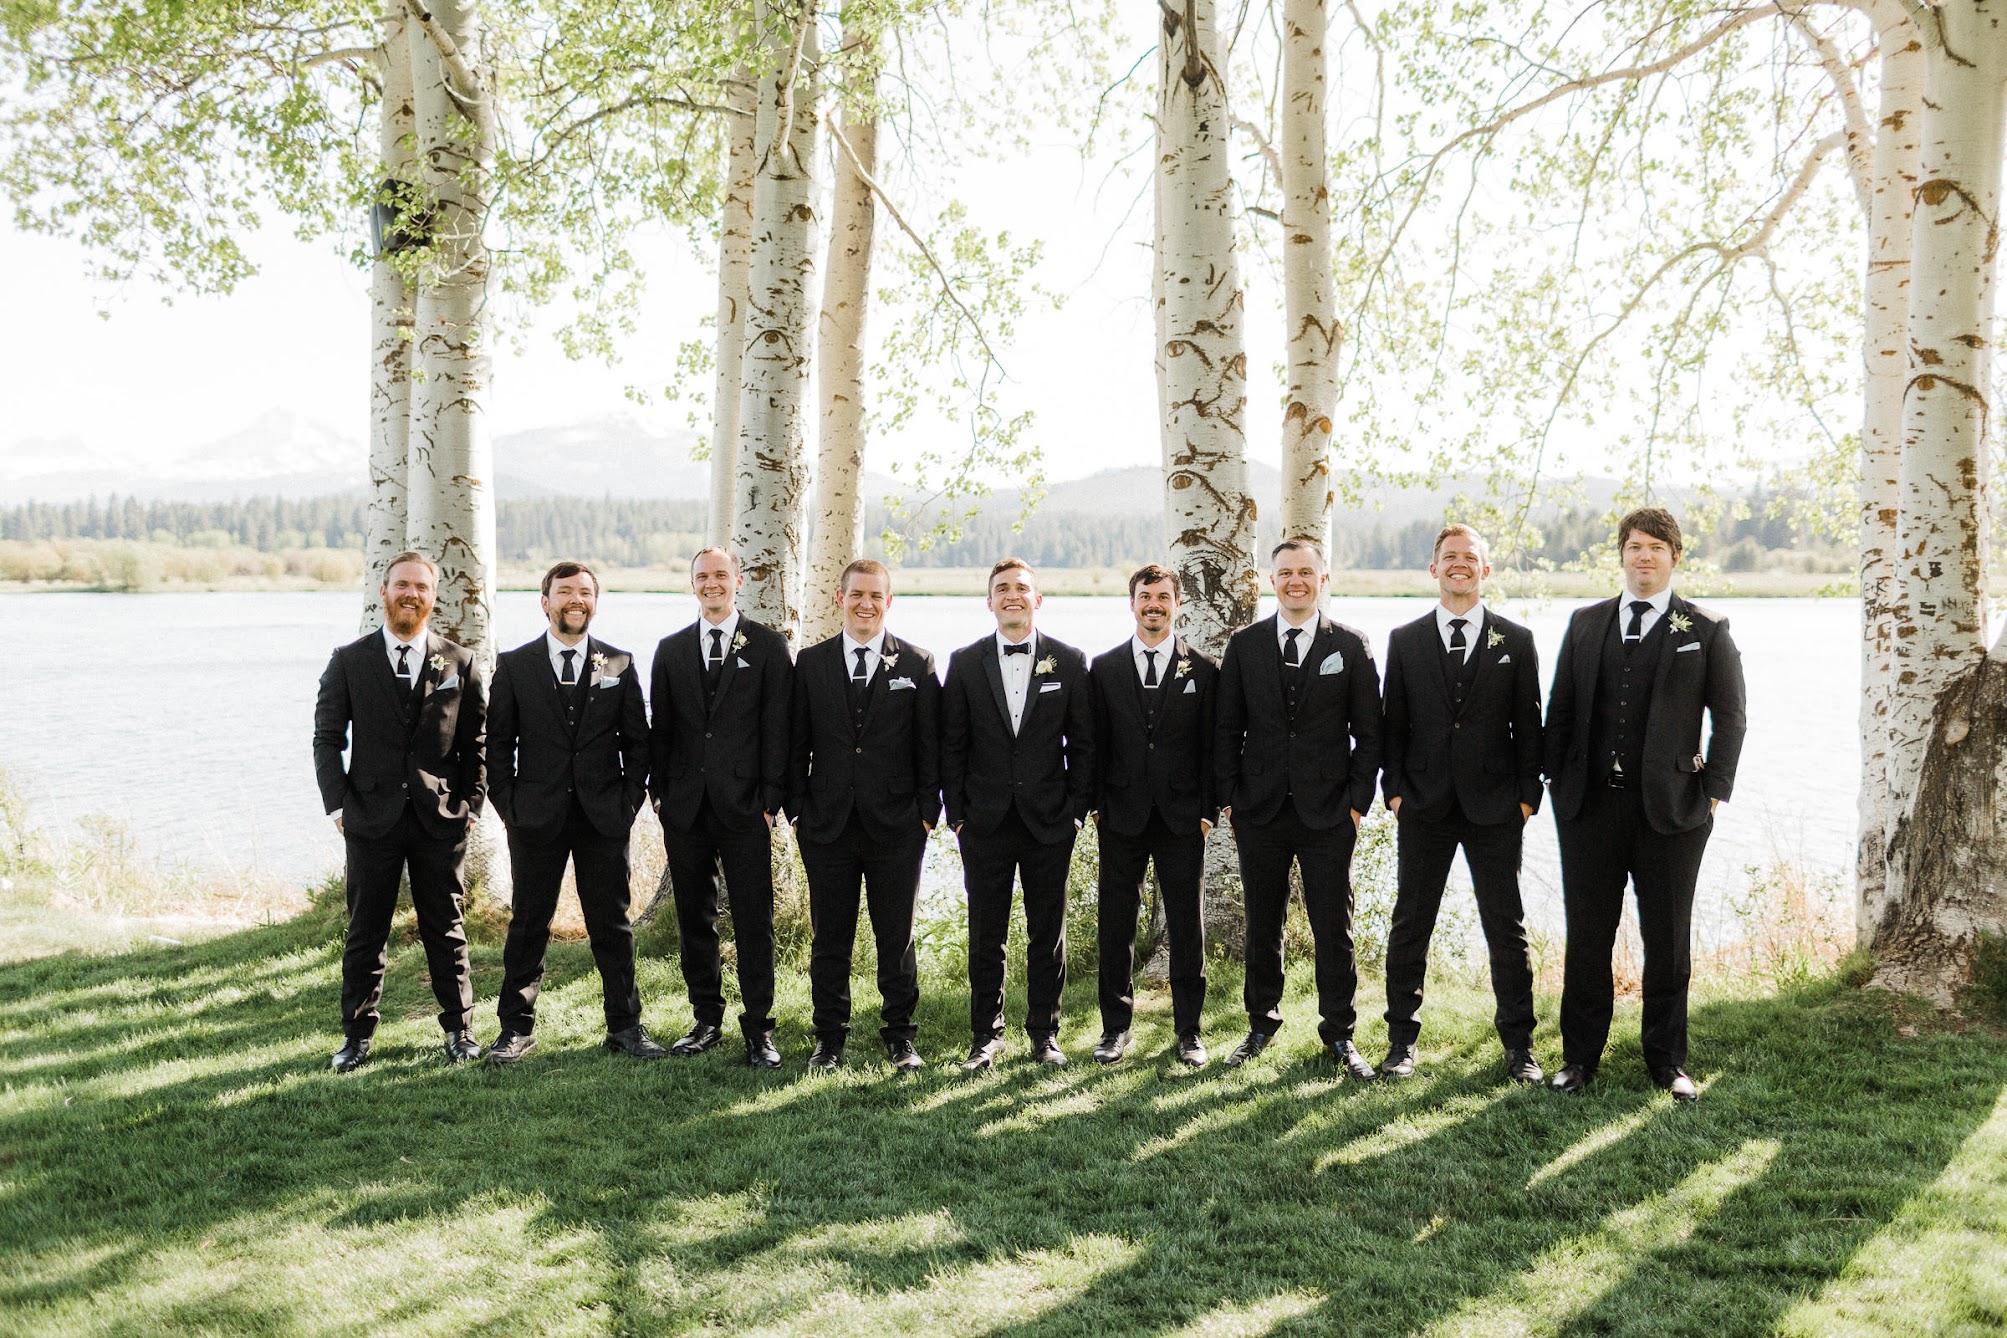 all the groomsmen in a line outside on the grass